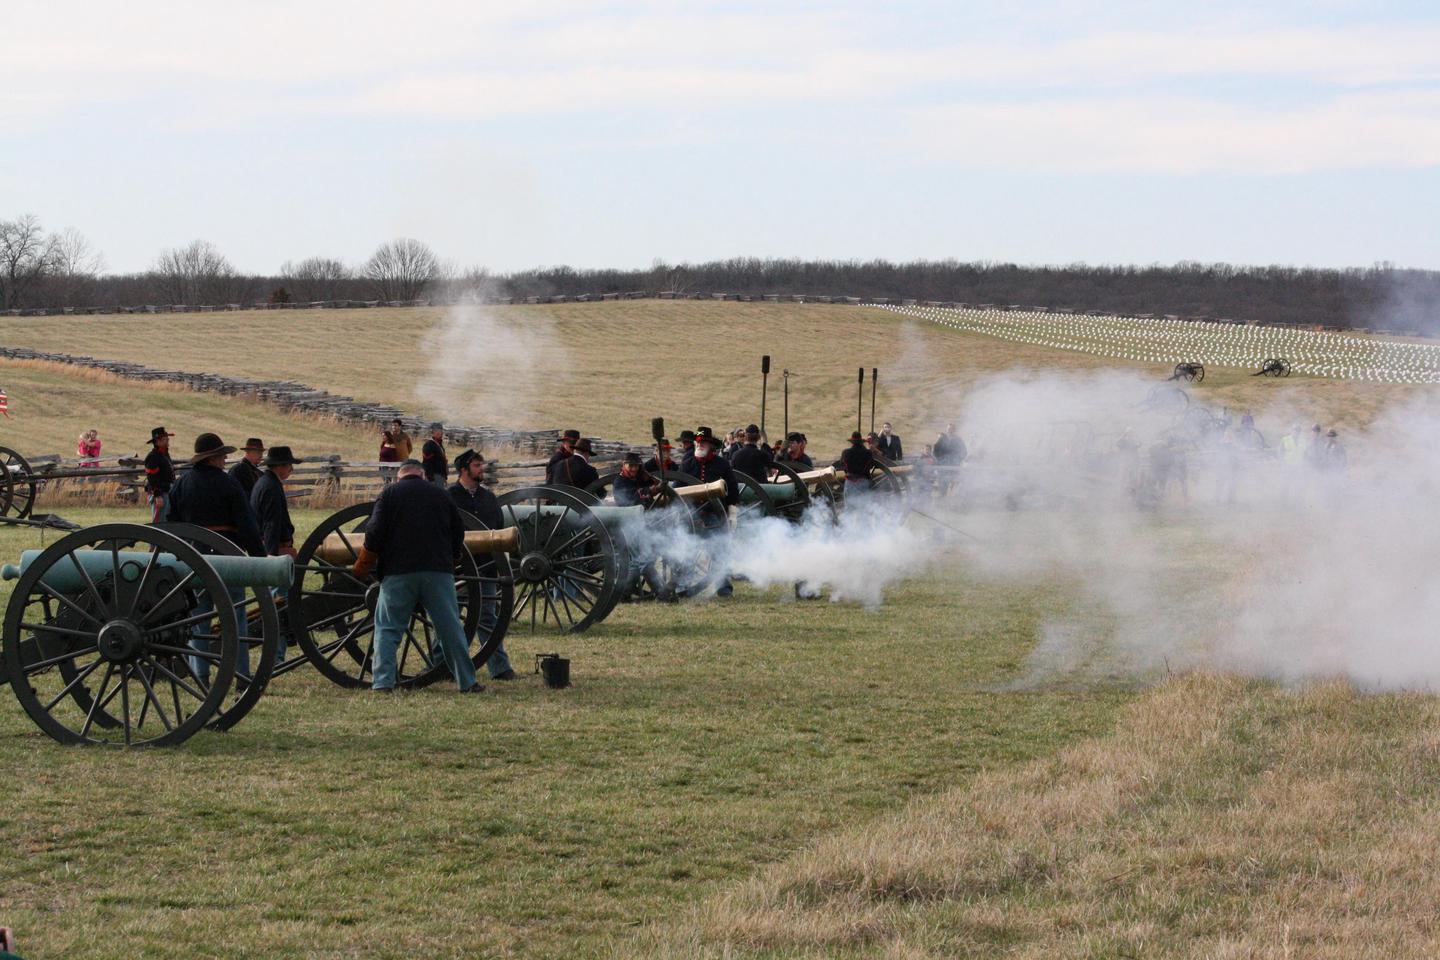 Union CannonsPhoto of Union artilleryman reenactors standing in Cox's field firing cannon's on the 150th Anniversary of the Battle of Pea Ridge.